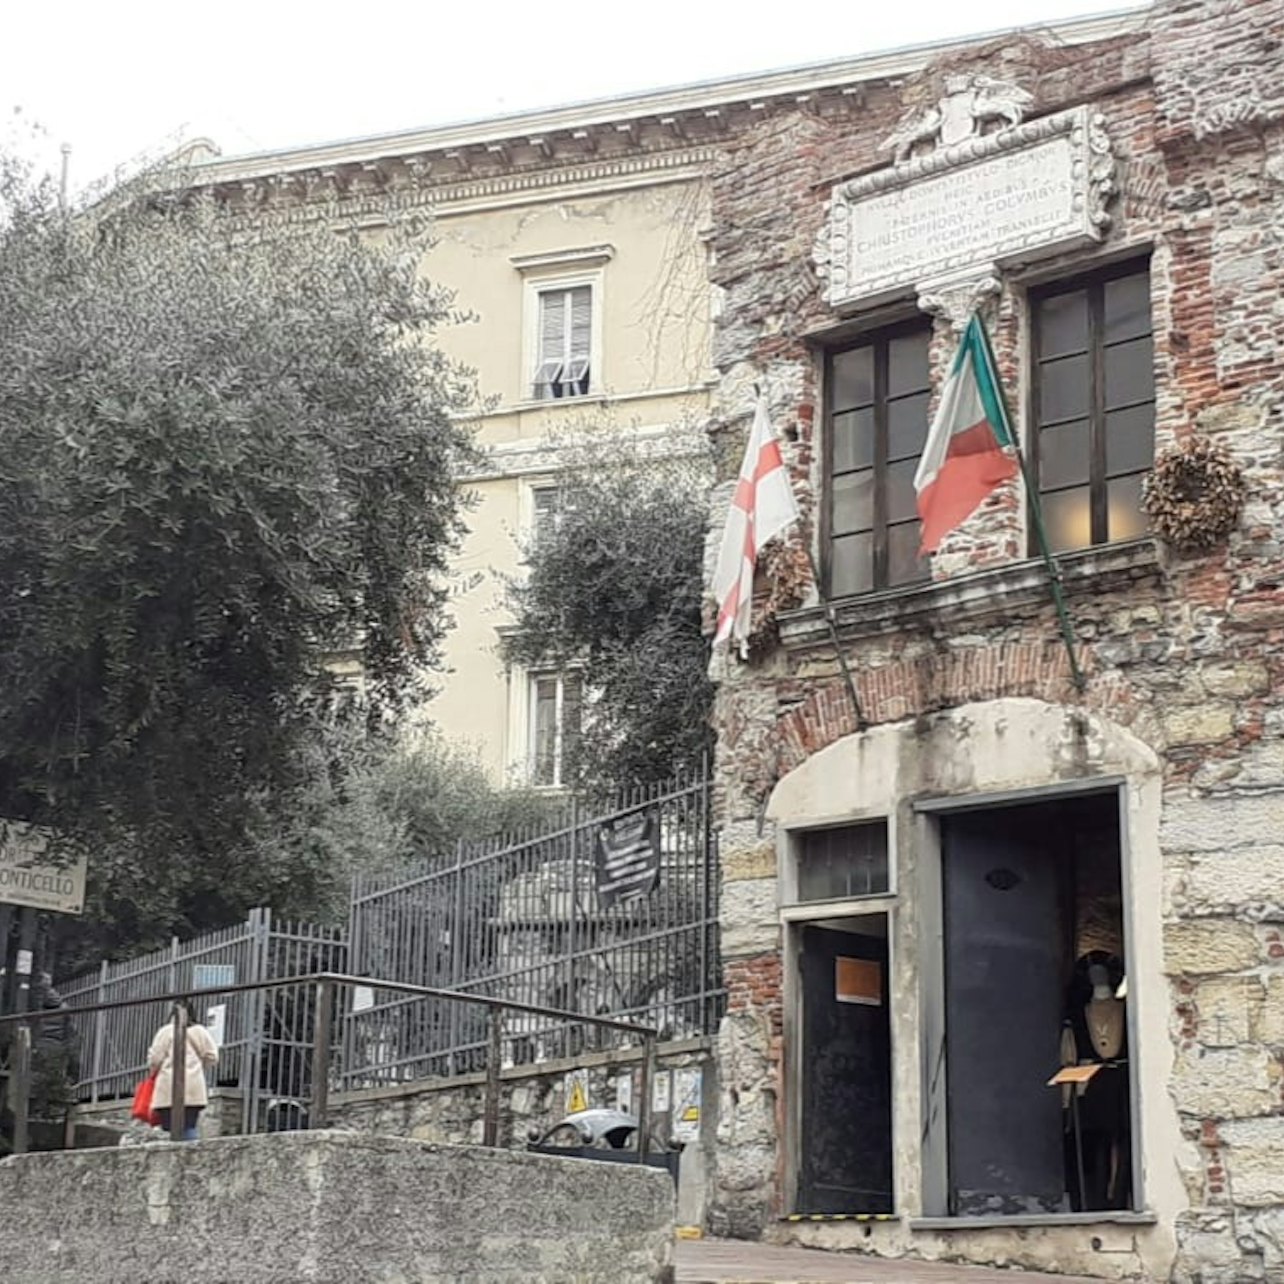 Christopher Columbus House - Accommodations in Genoa